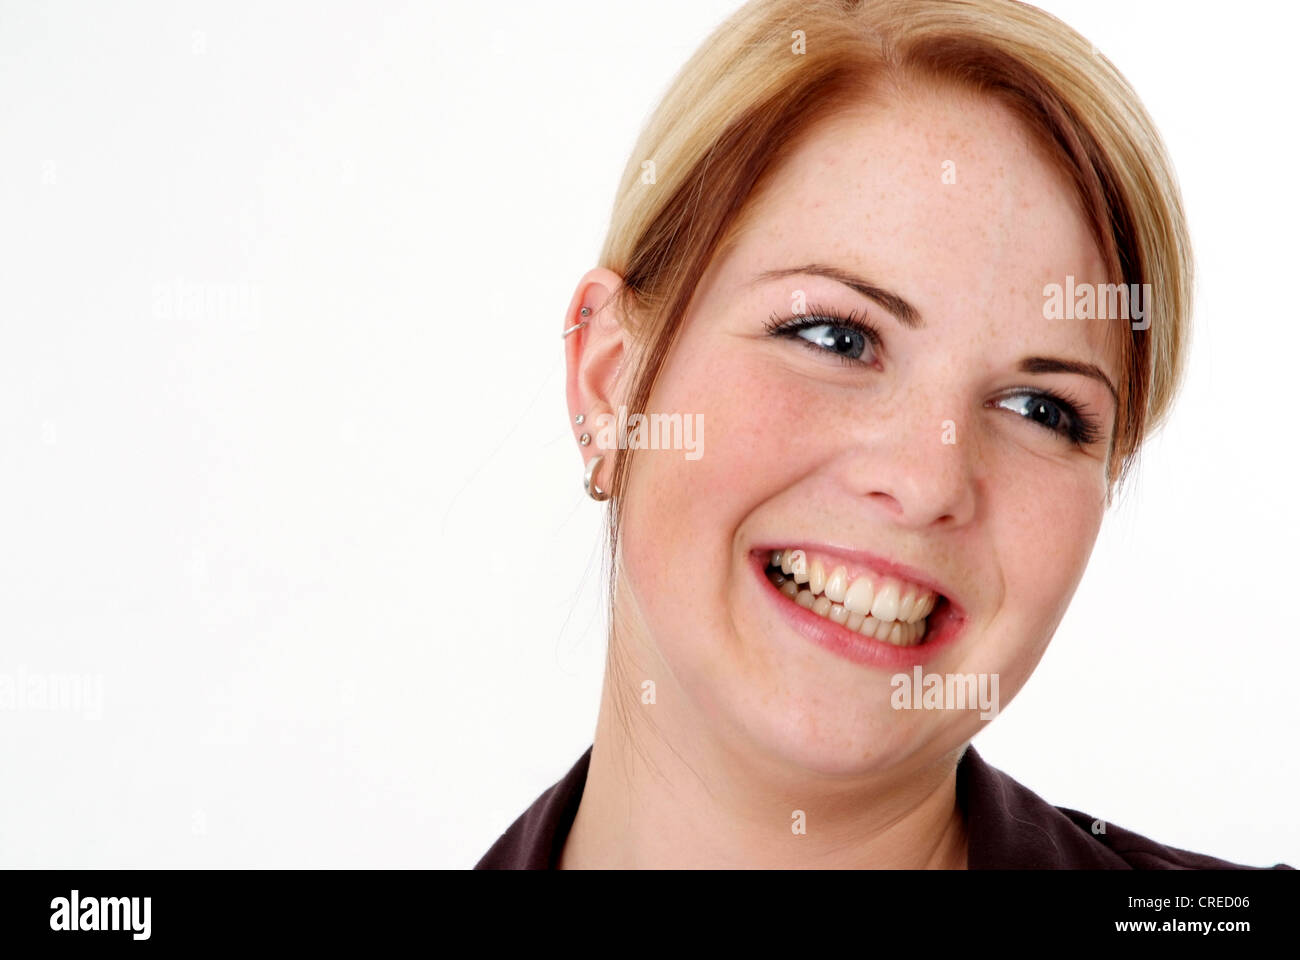 blond woman laughing Stock Photo